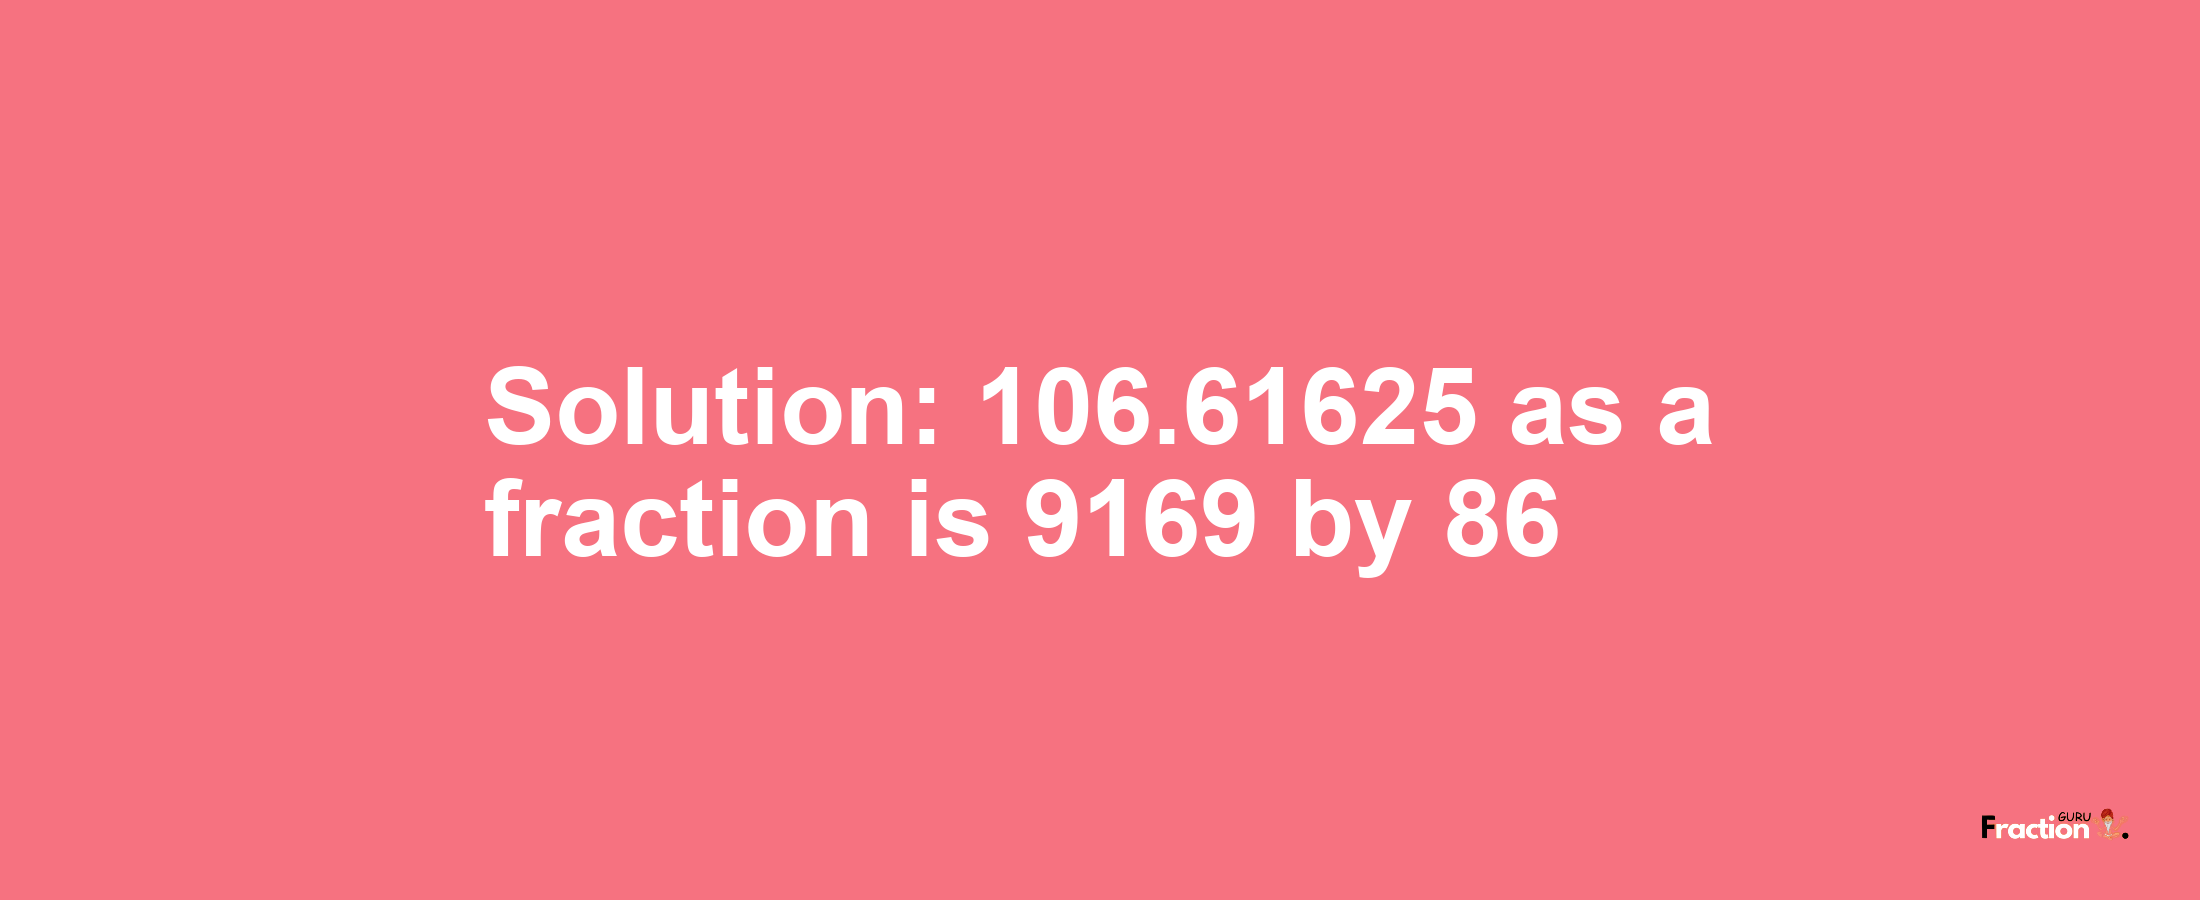 Solution:106.61625 as a fraction is 9169/86